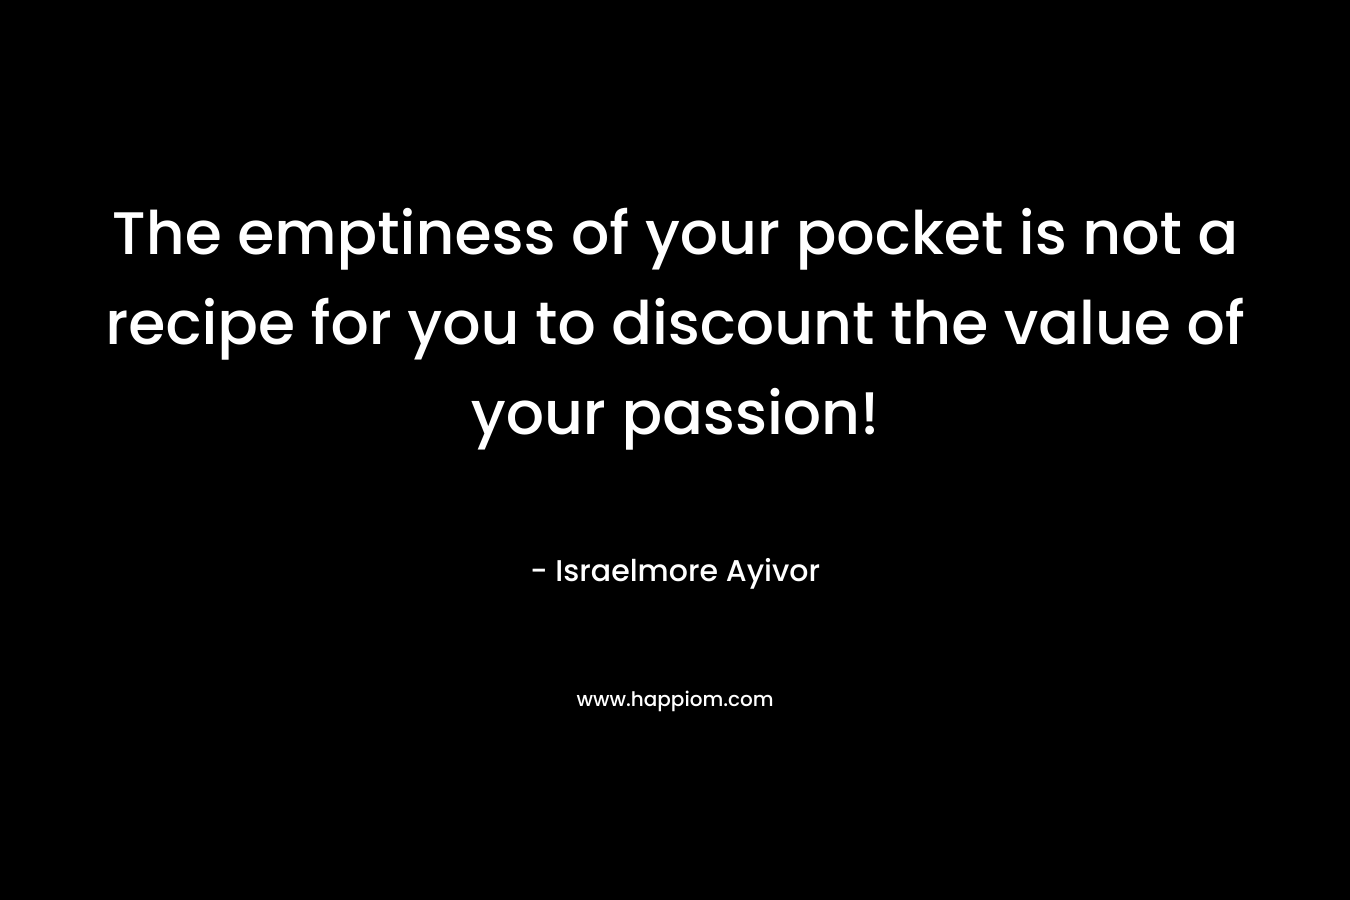 The emptiness of your pocket is not a recipe for you to discount the value of your passion! – Israelmore Ayivor